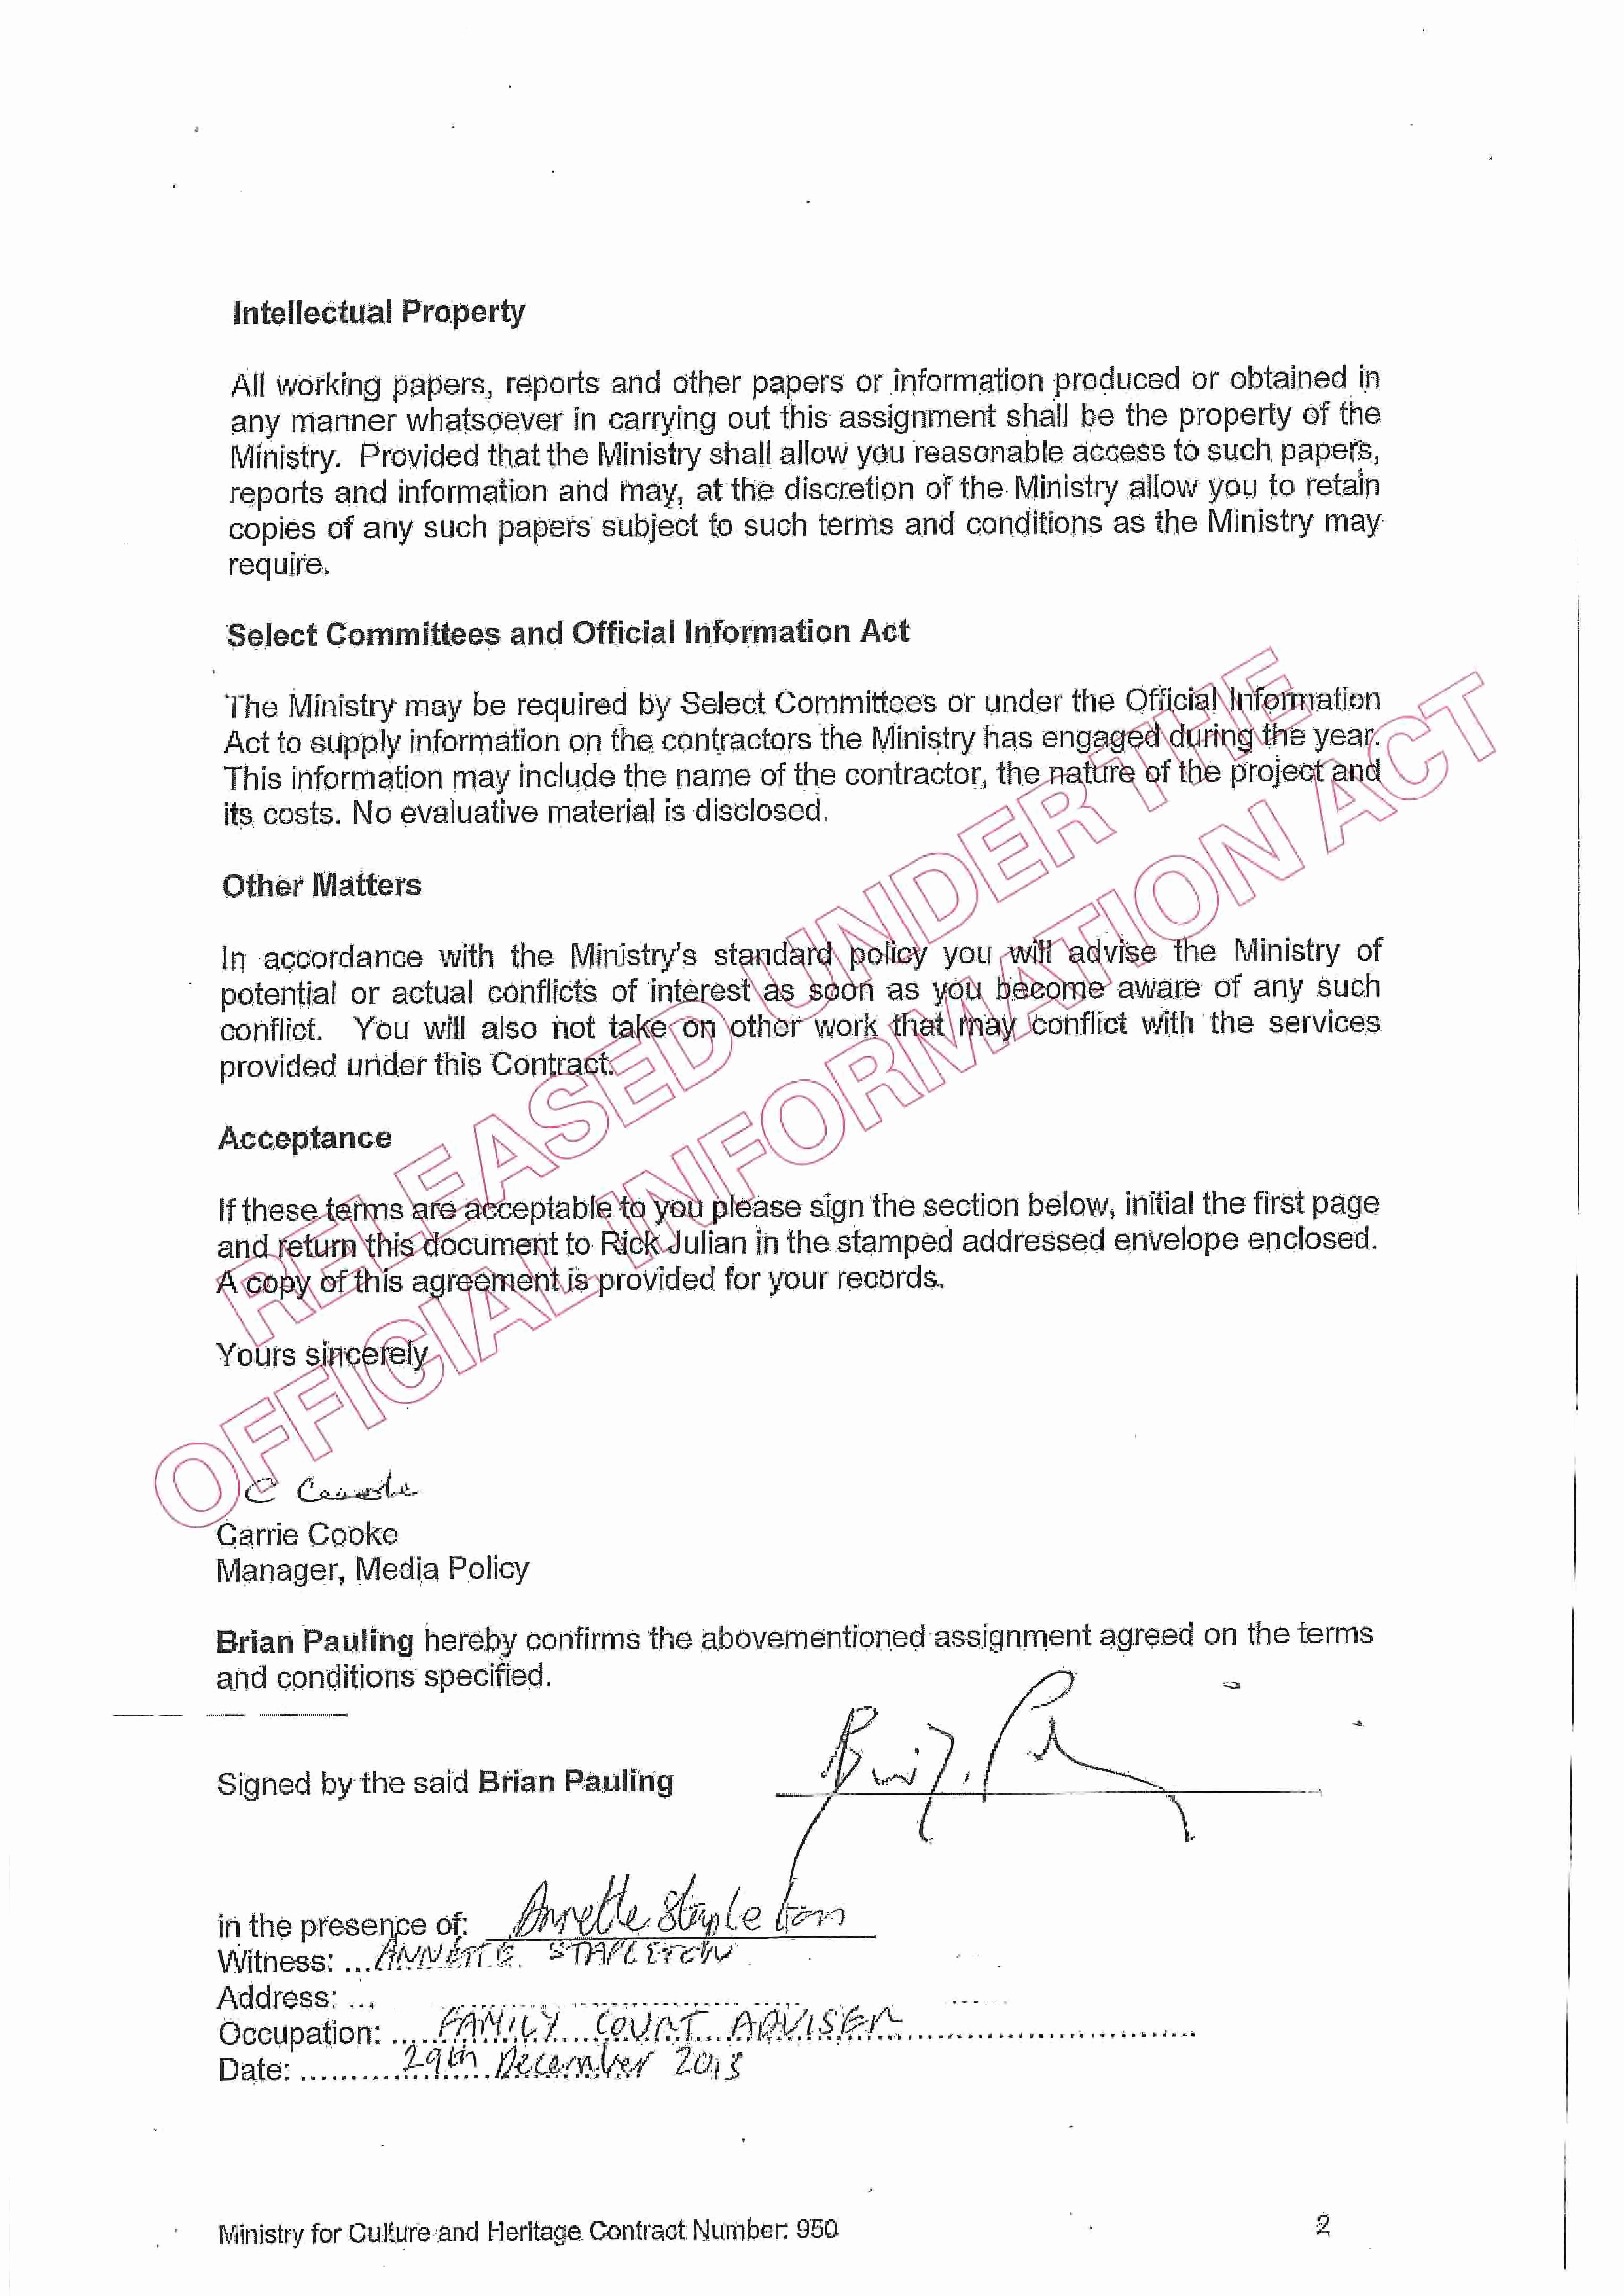 Contractor Engagement Letter Awesome 3 Eoi Process Letter Of Engagement From Mch to Independent